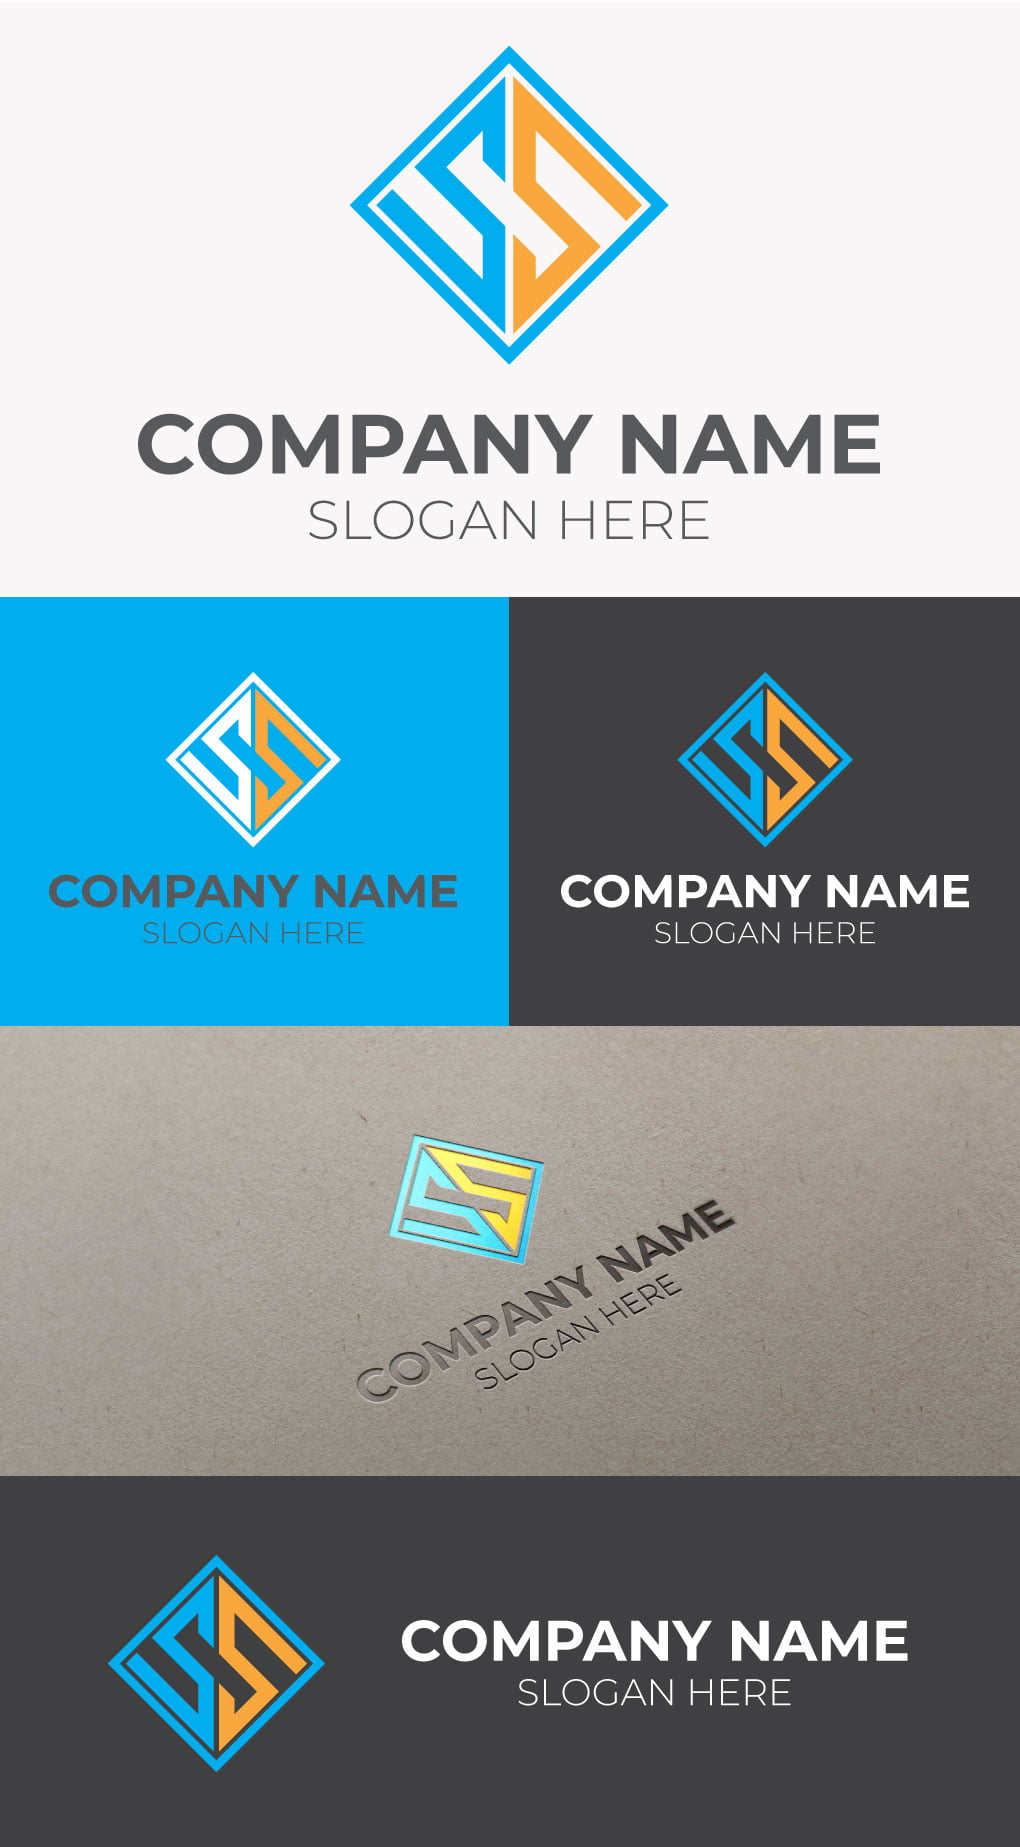 SS LETTER DESIGN FREE TEMPLATE